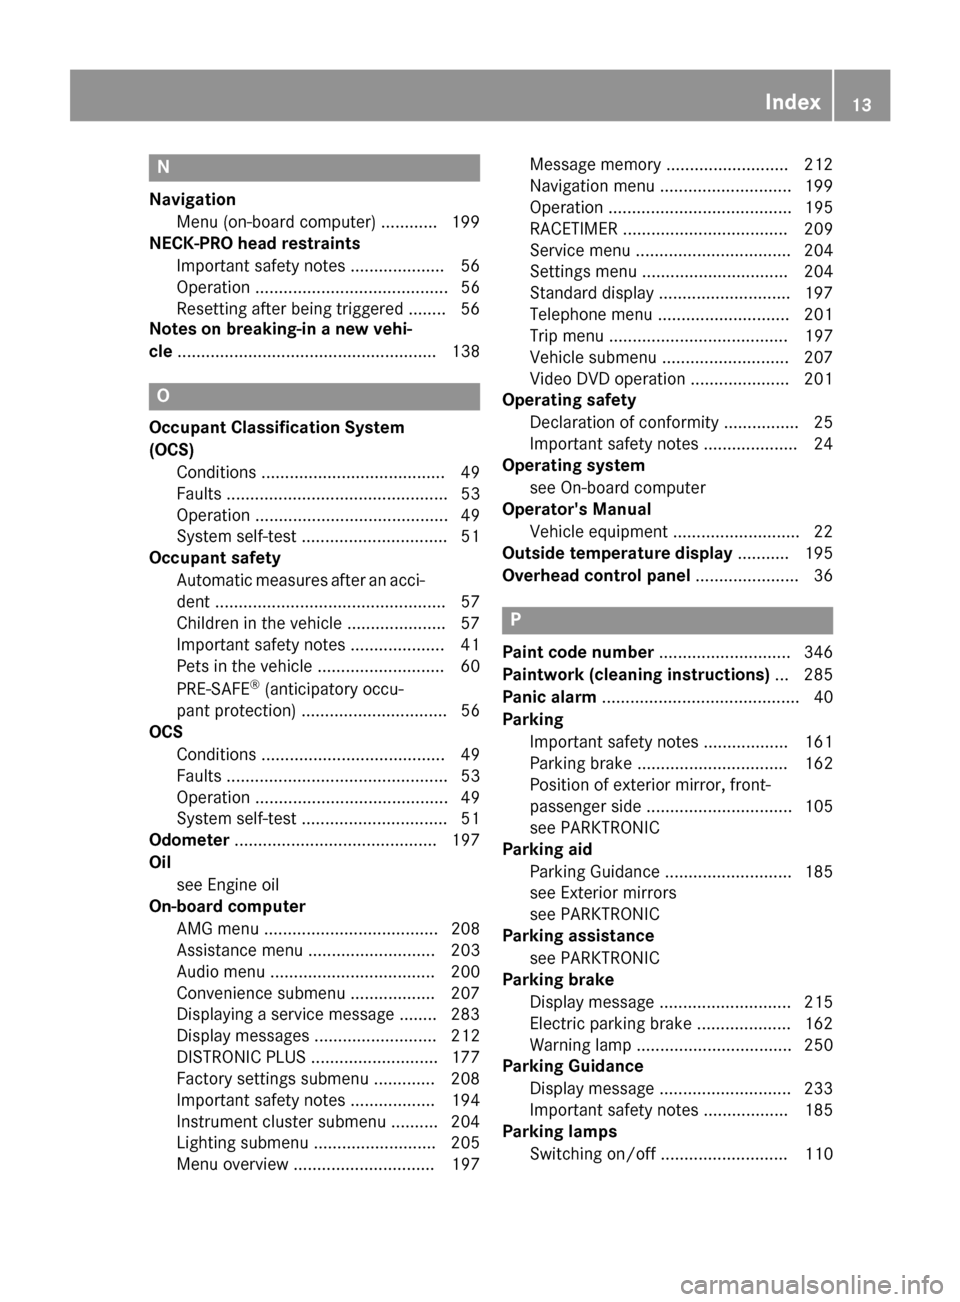 MERCEDES-BENZ SLK-Class 2015 R172 Owners Manual N
Navigation Menu (on-board computer) ............ 199
NECK-PRO head restraints
Important safety note s.................... 56
Operation ......................................... 56
Resetting after be